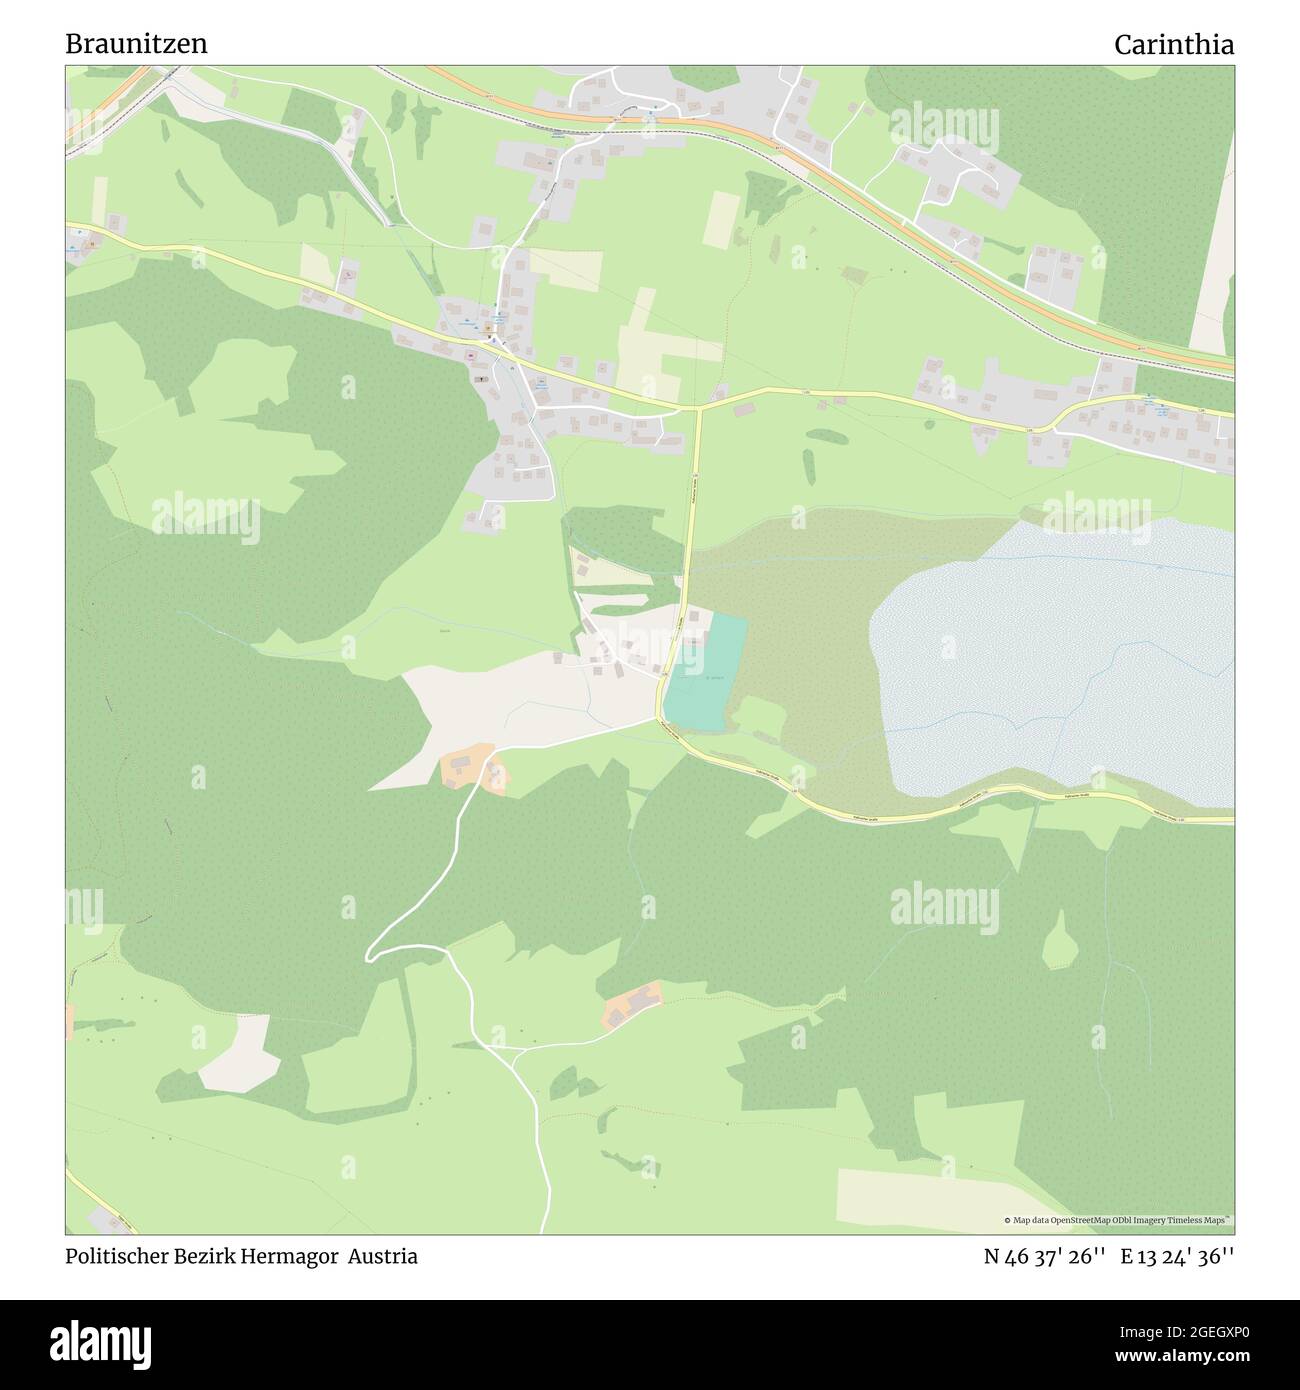 Braunitzen, Politischer Bezirk Hermagor, Austria, Carinthia, N 46 37' 26'', E 13 24' 36'', map, Timeless Map published in 2021. Travelers, explorers and adventurers like Florence Nightingale, David Livingstone, Ernest Shackleton, Lewis and Clark and Sherlock Holmes relied on maps to plan travels to the world's most remote corners, Timeless Maps is mapping most locations on the globe, showing the achievement of great dreams Stock Photo